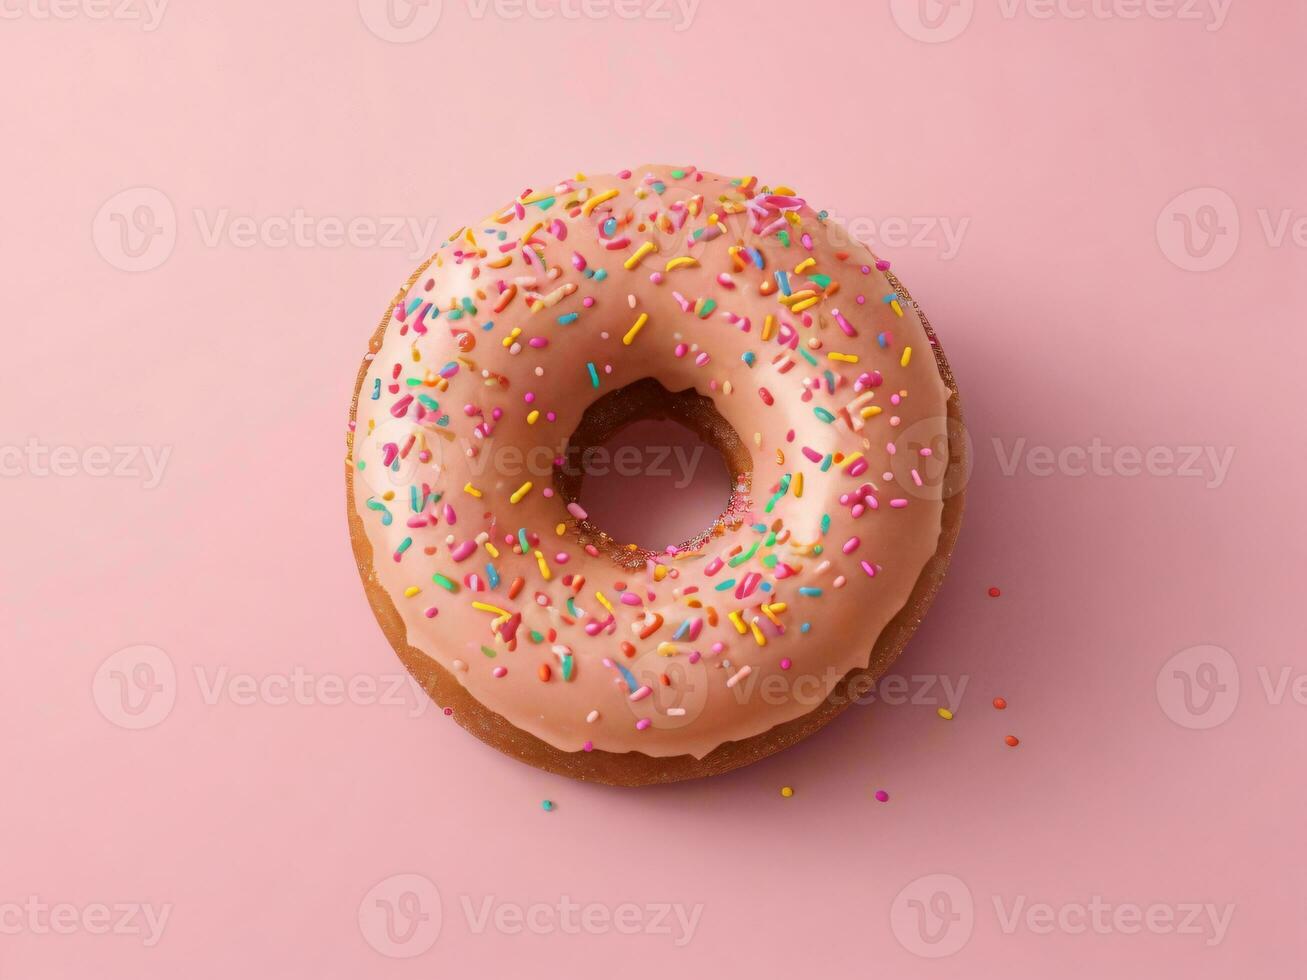 Sweet brown donut with multicolored sprinkles on a pink background photo